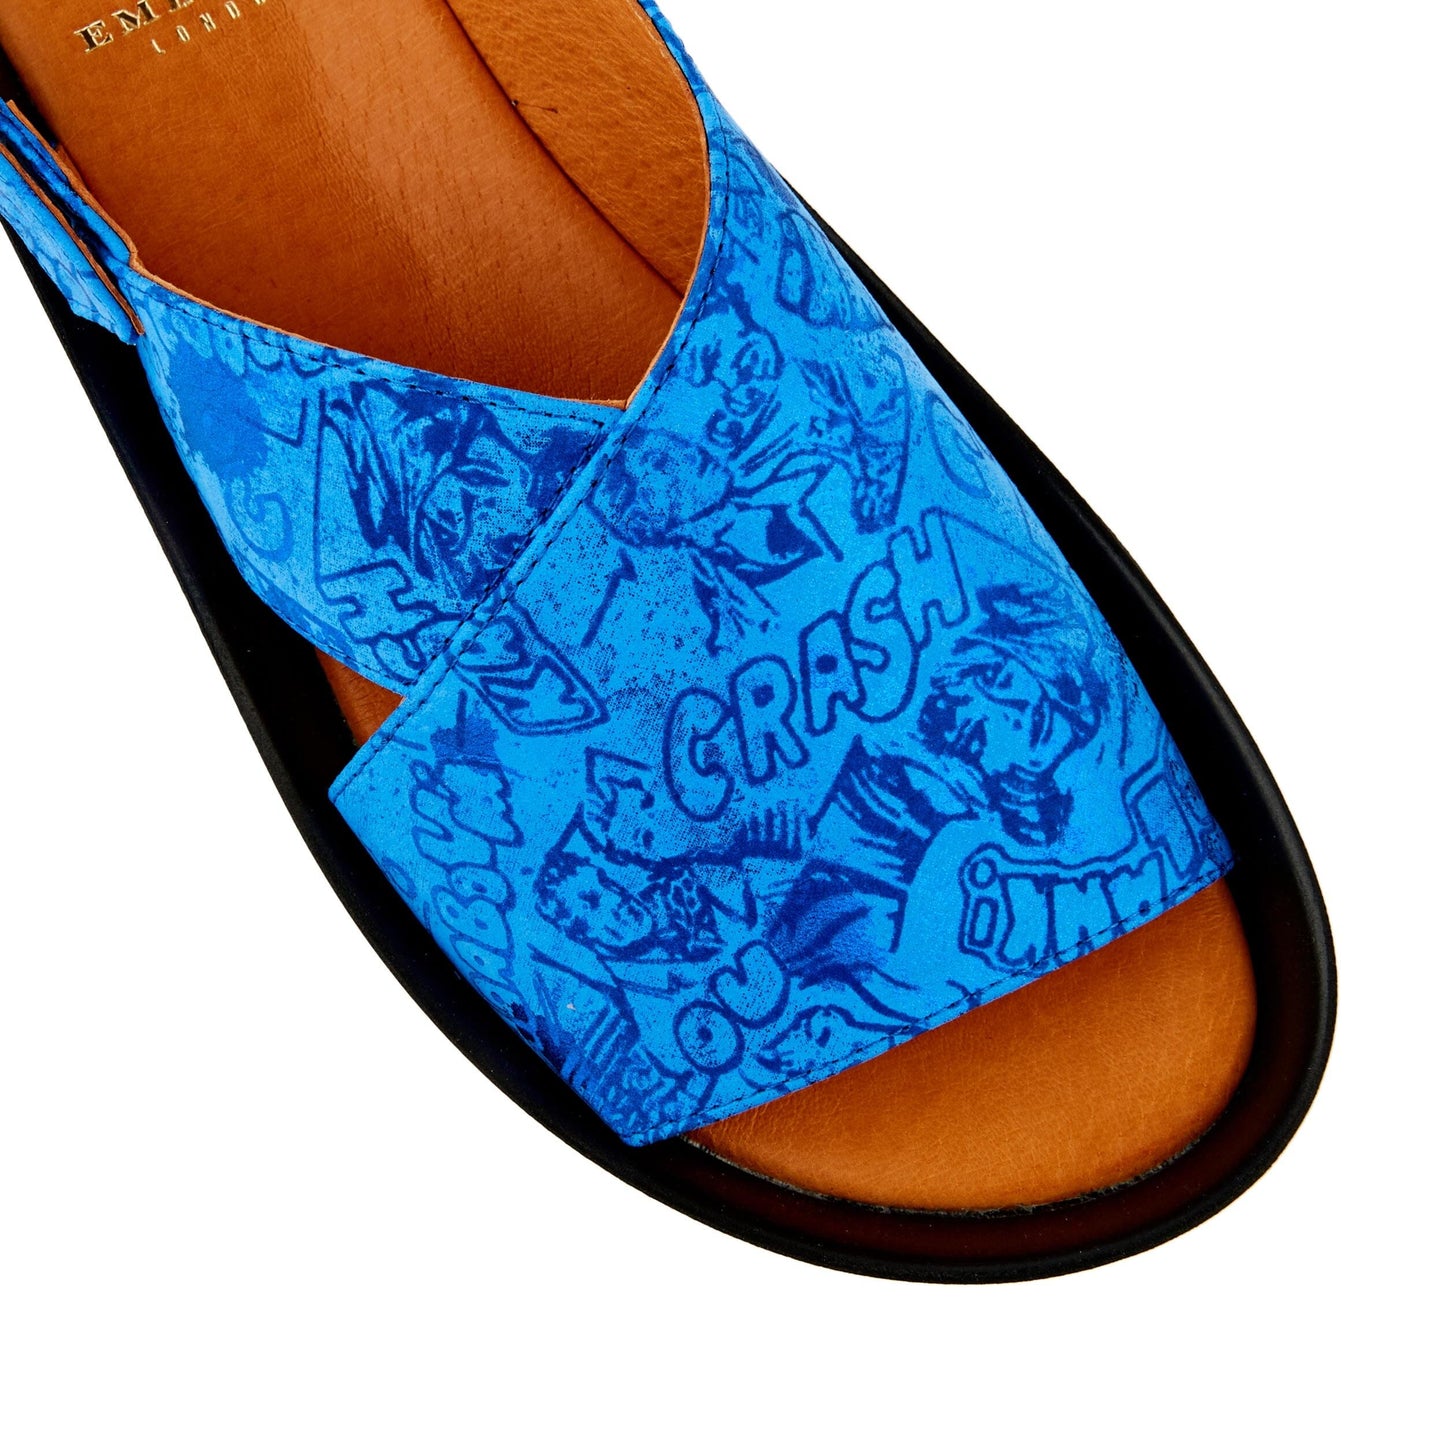 Melody - Bright Blue Womens Sandals Embassy London 